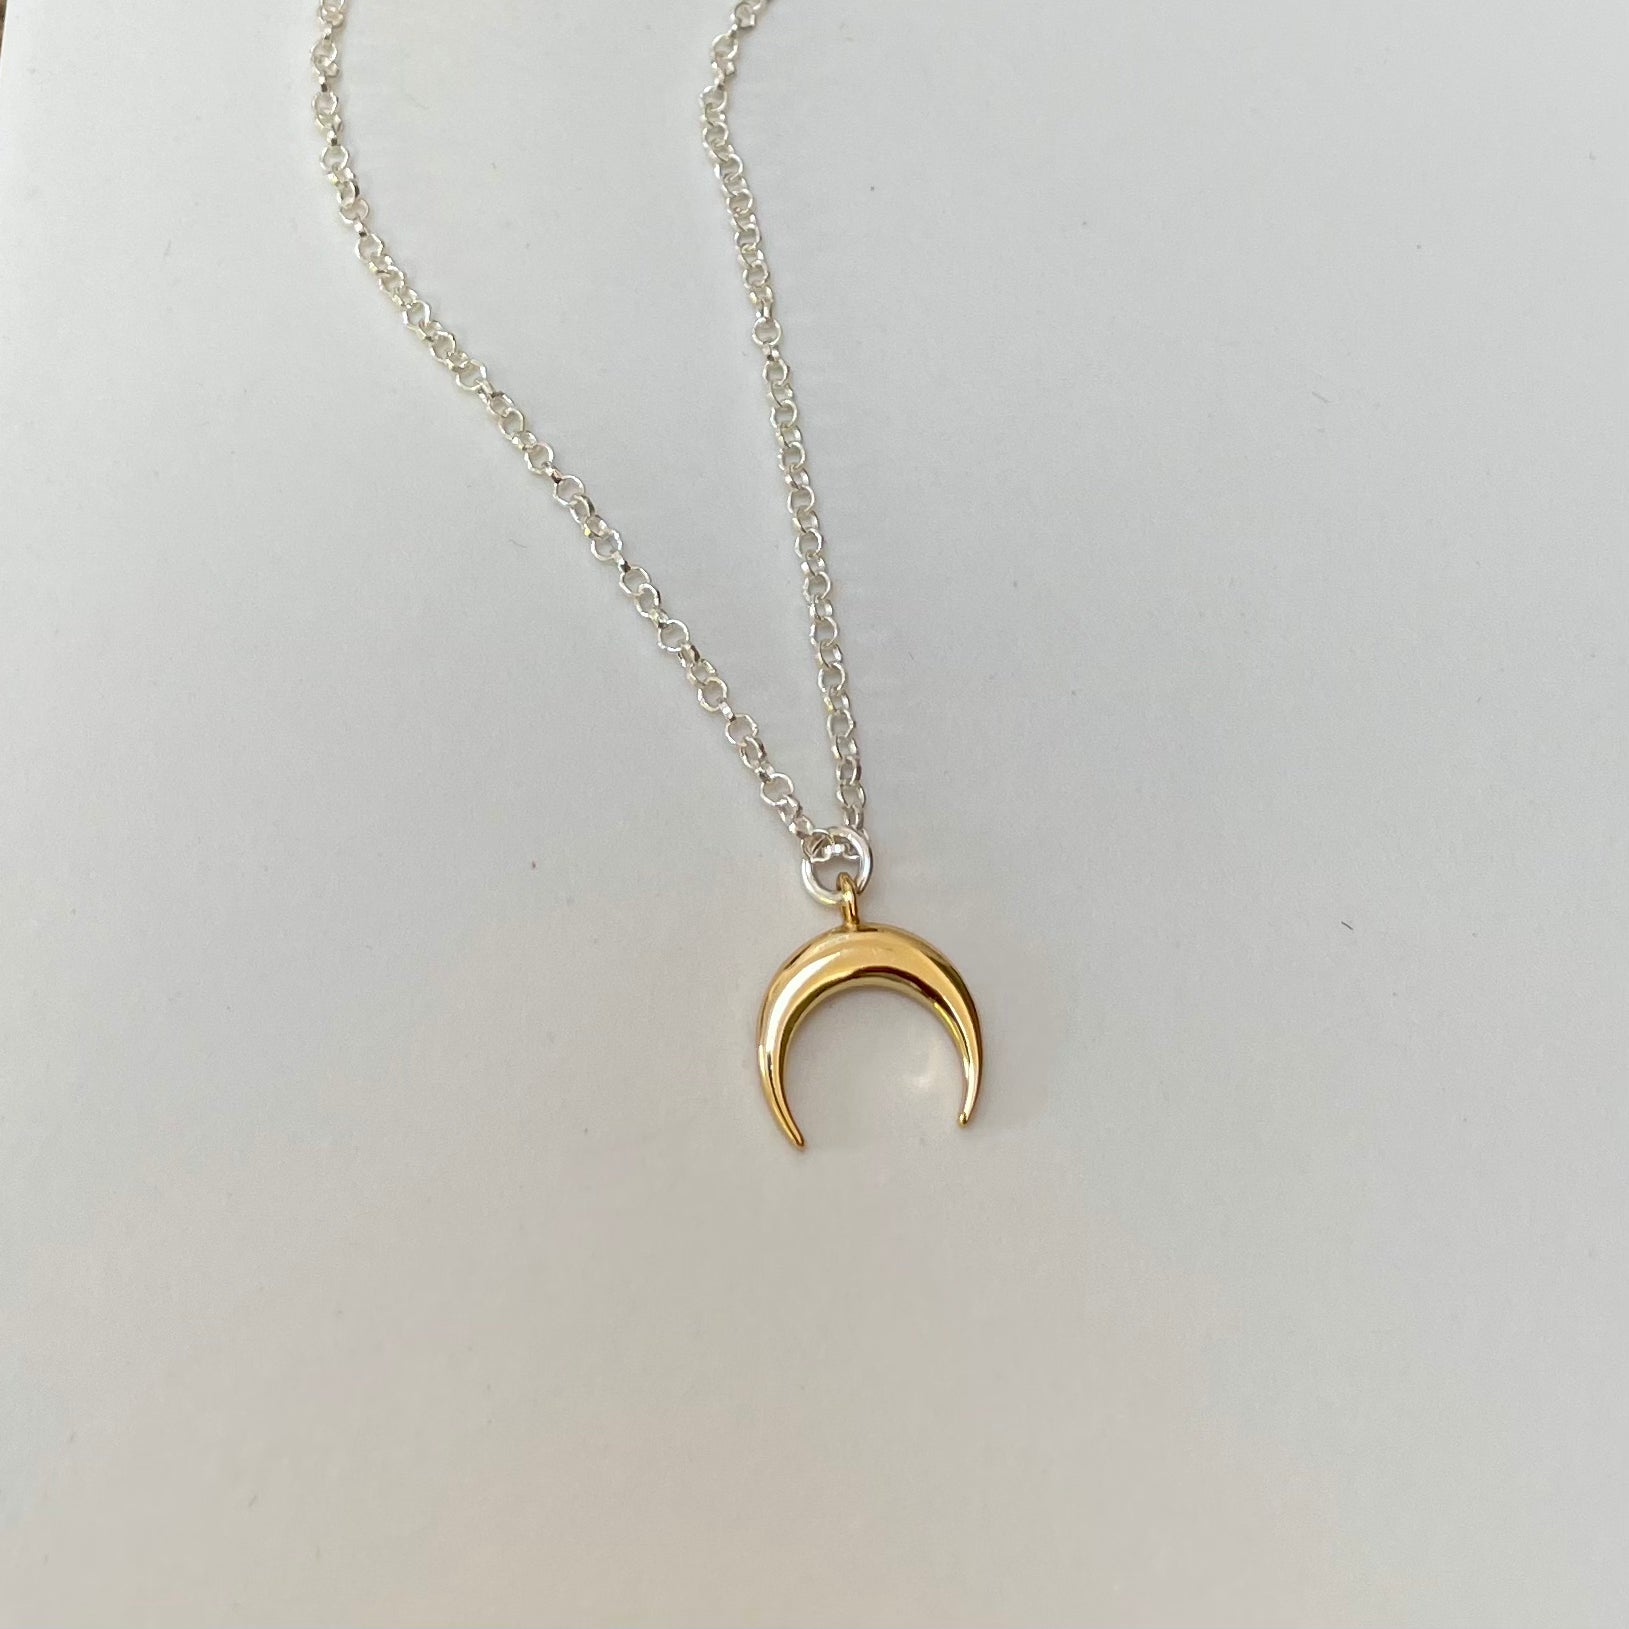 Luna moon charm on 18" sterling silver chain 